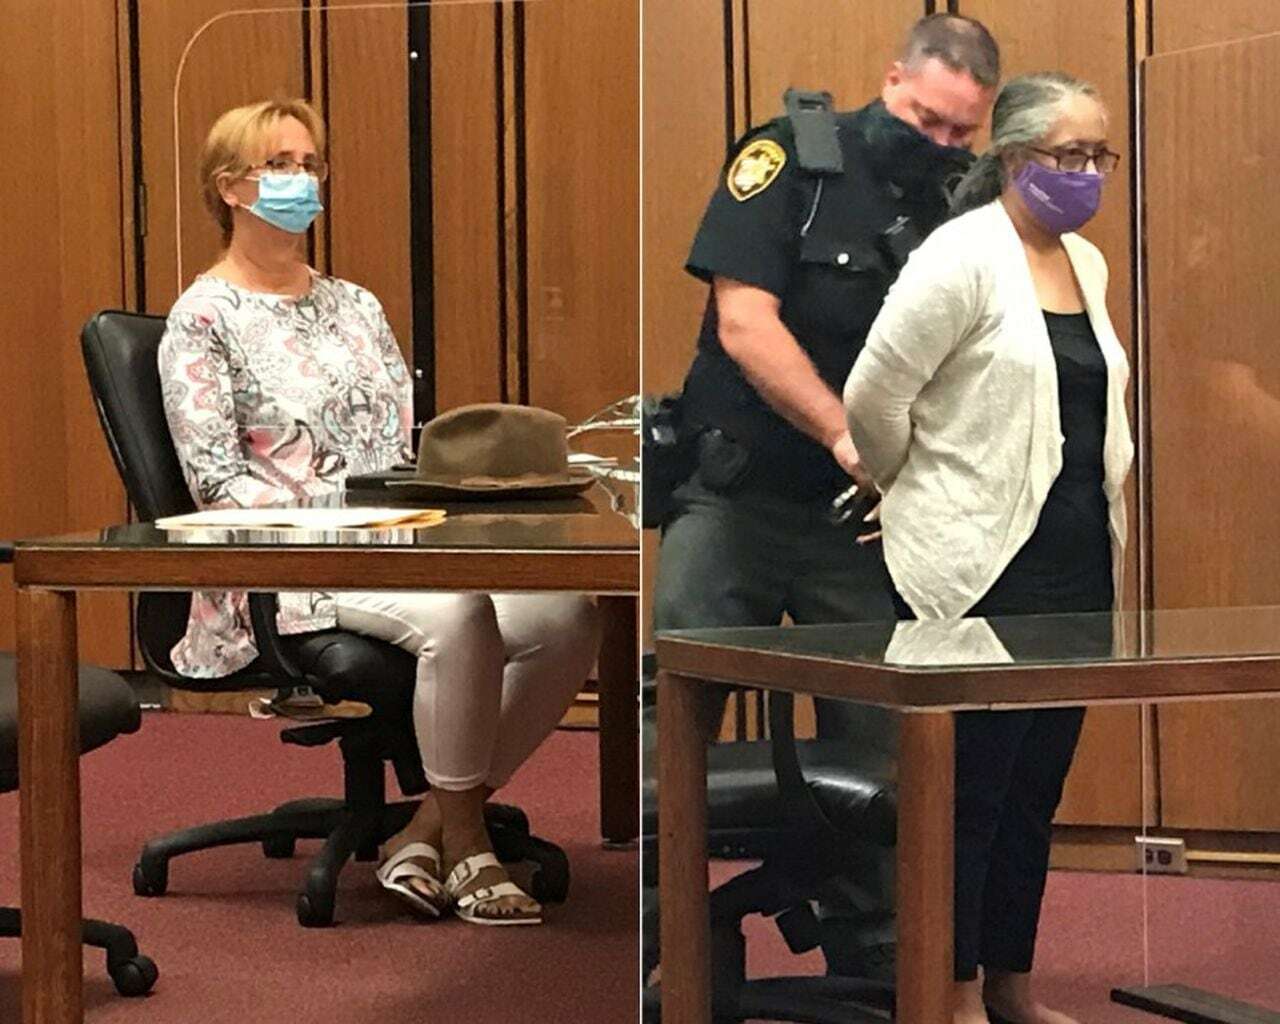 White woman who stole $250K gets probation, while Black woman who stole $40K goes to jail. Disparate sentences spark calls for reform